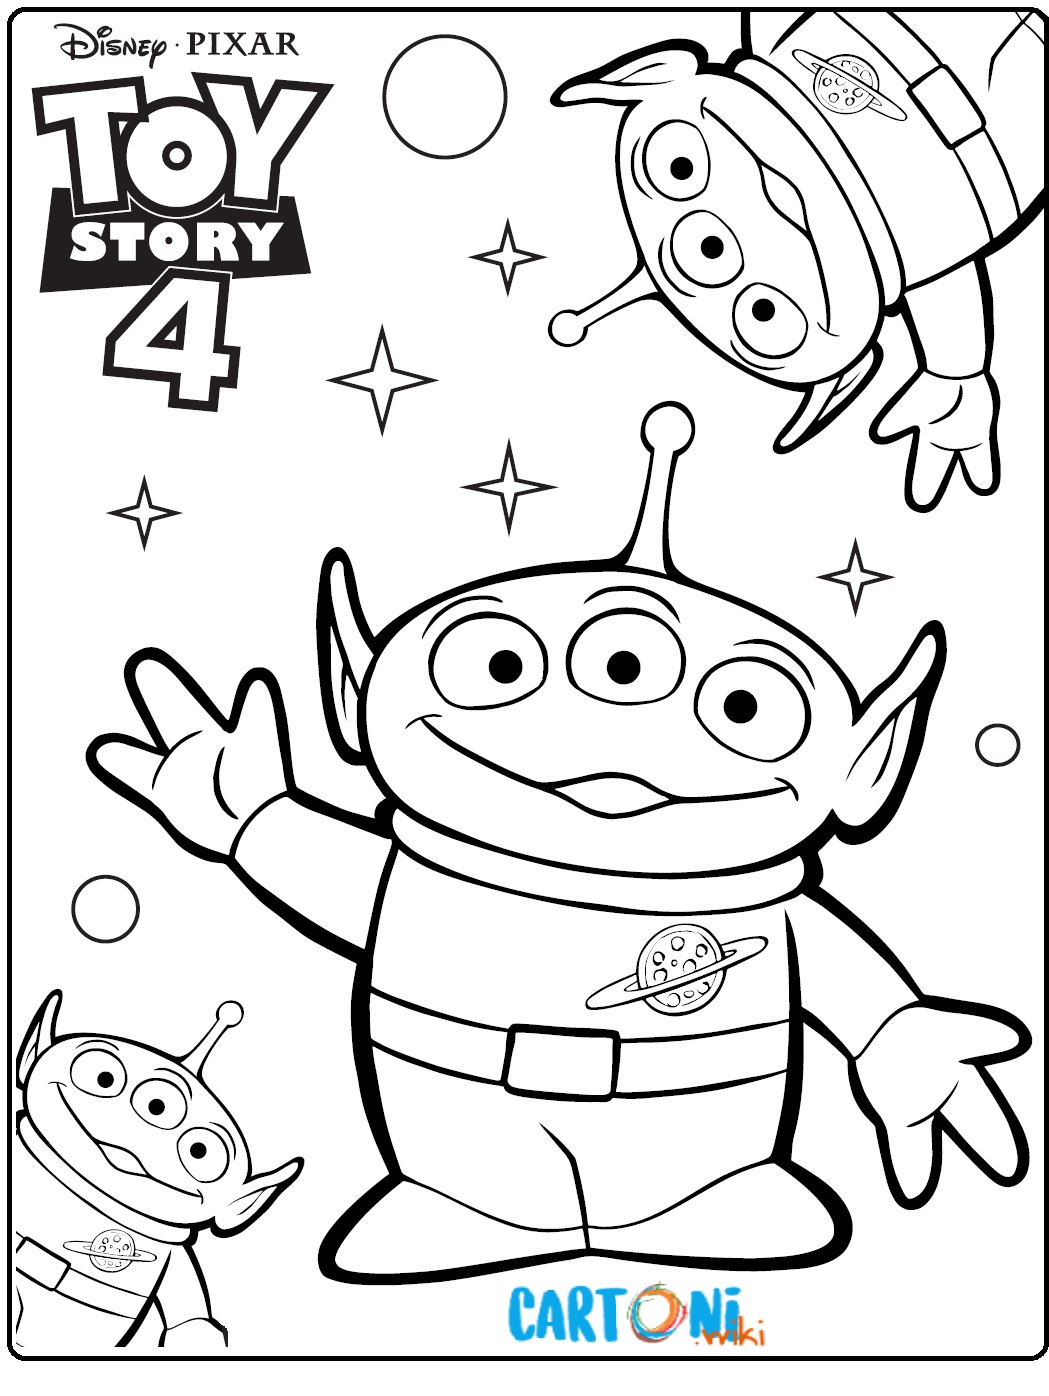 Toy Story 4 coloring pages